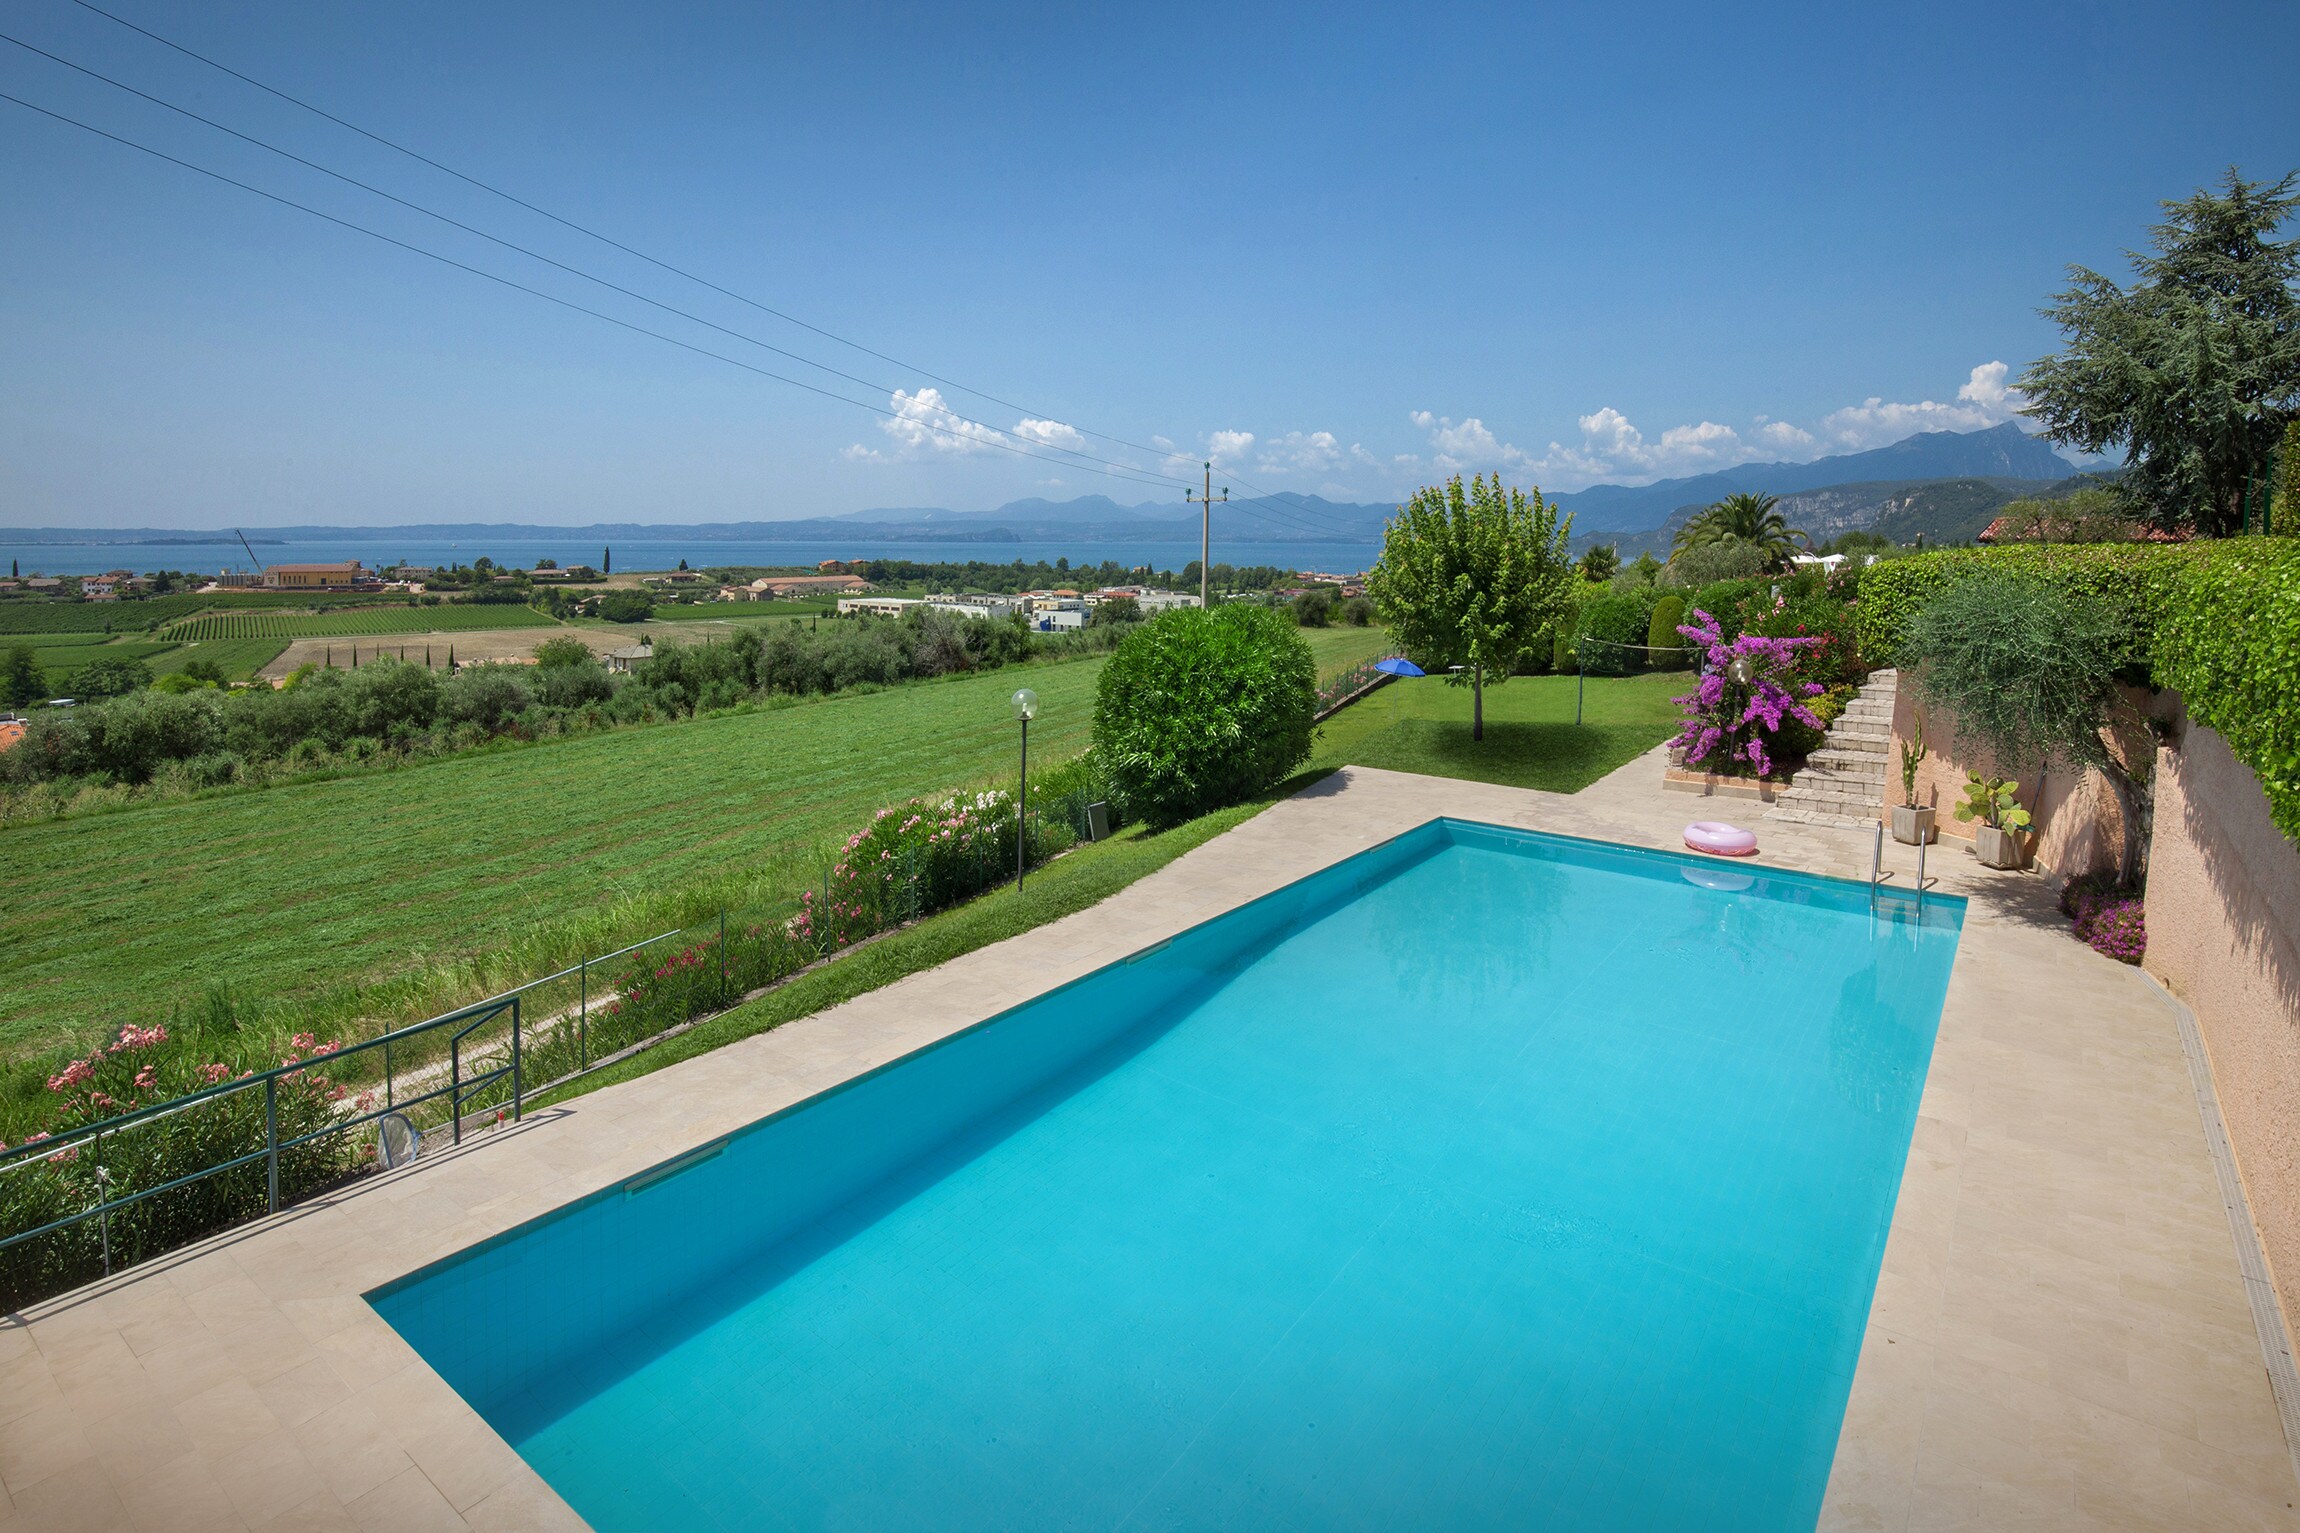 Property Image 2 - 2 Bedroom Apartment in the Hills Overlooking Bardolino